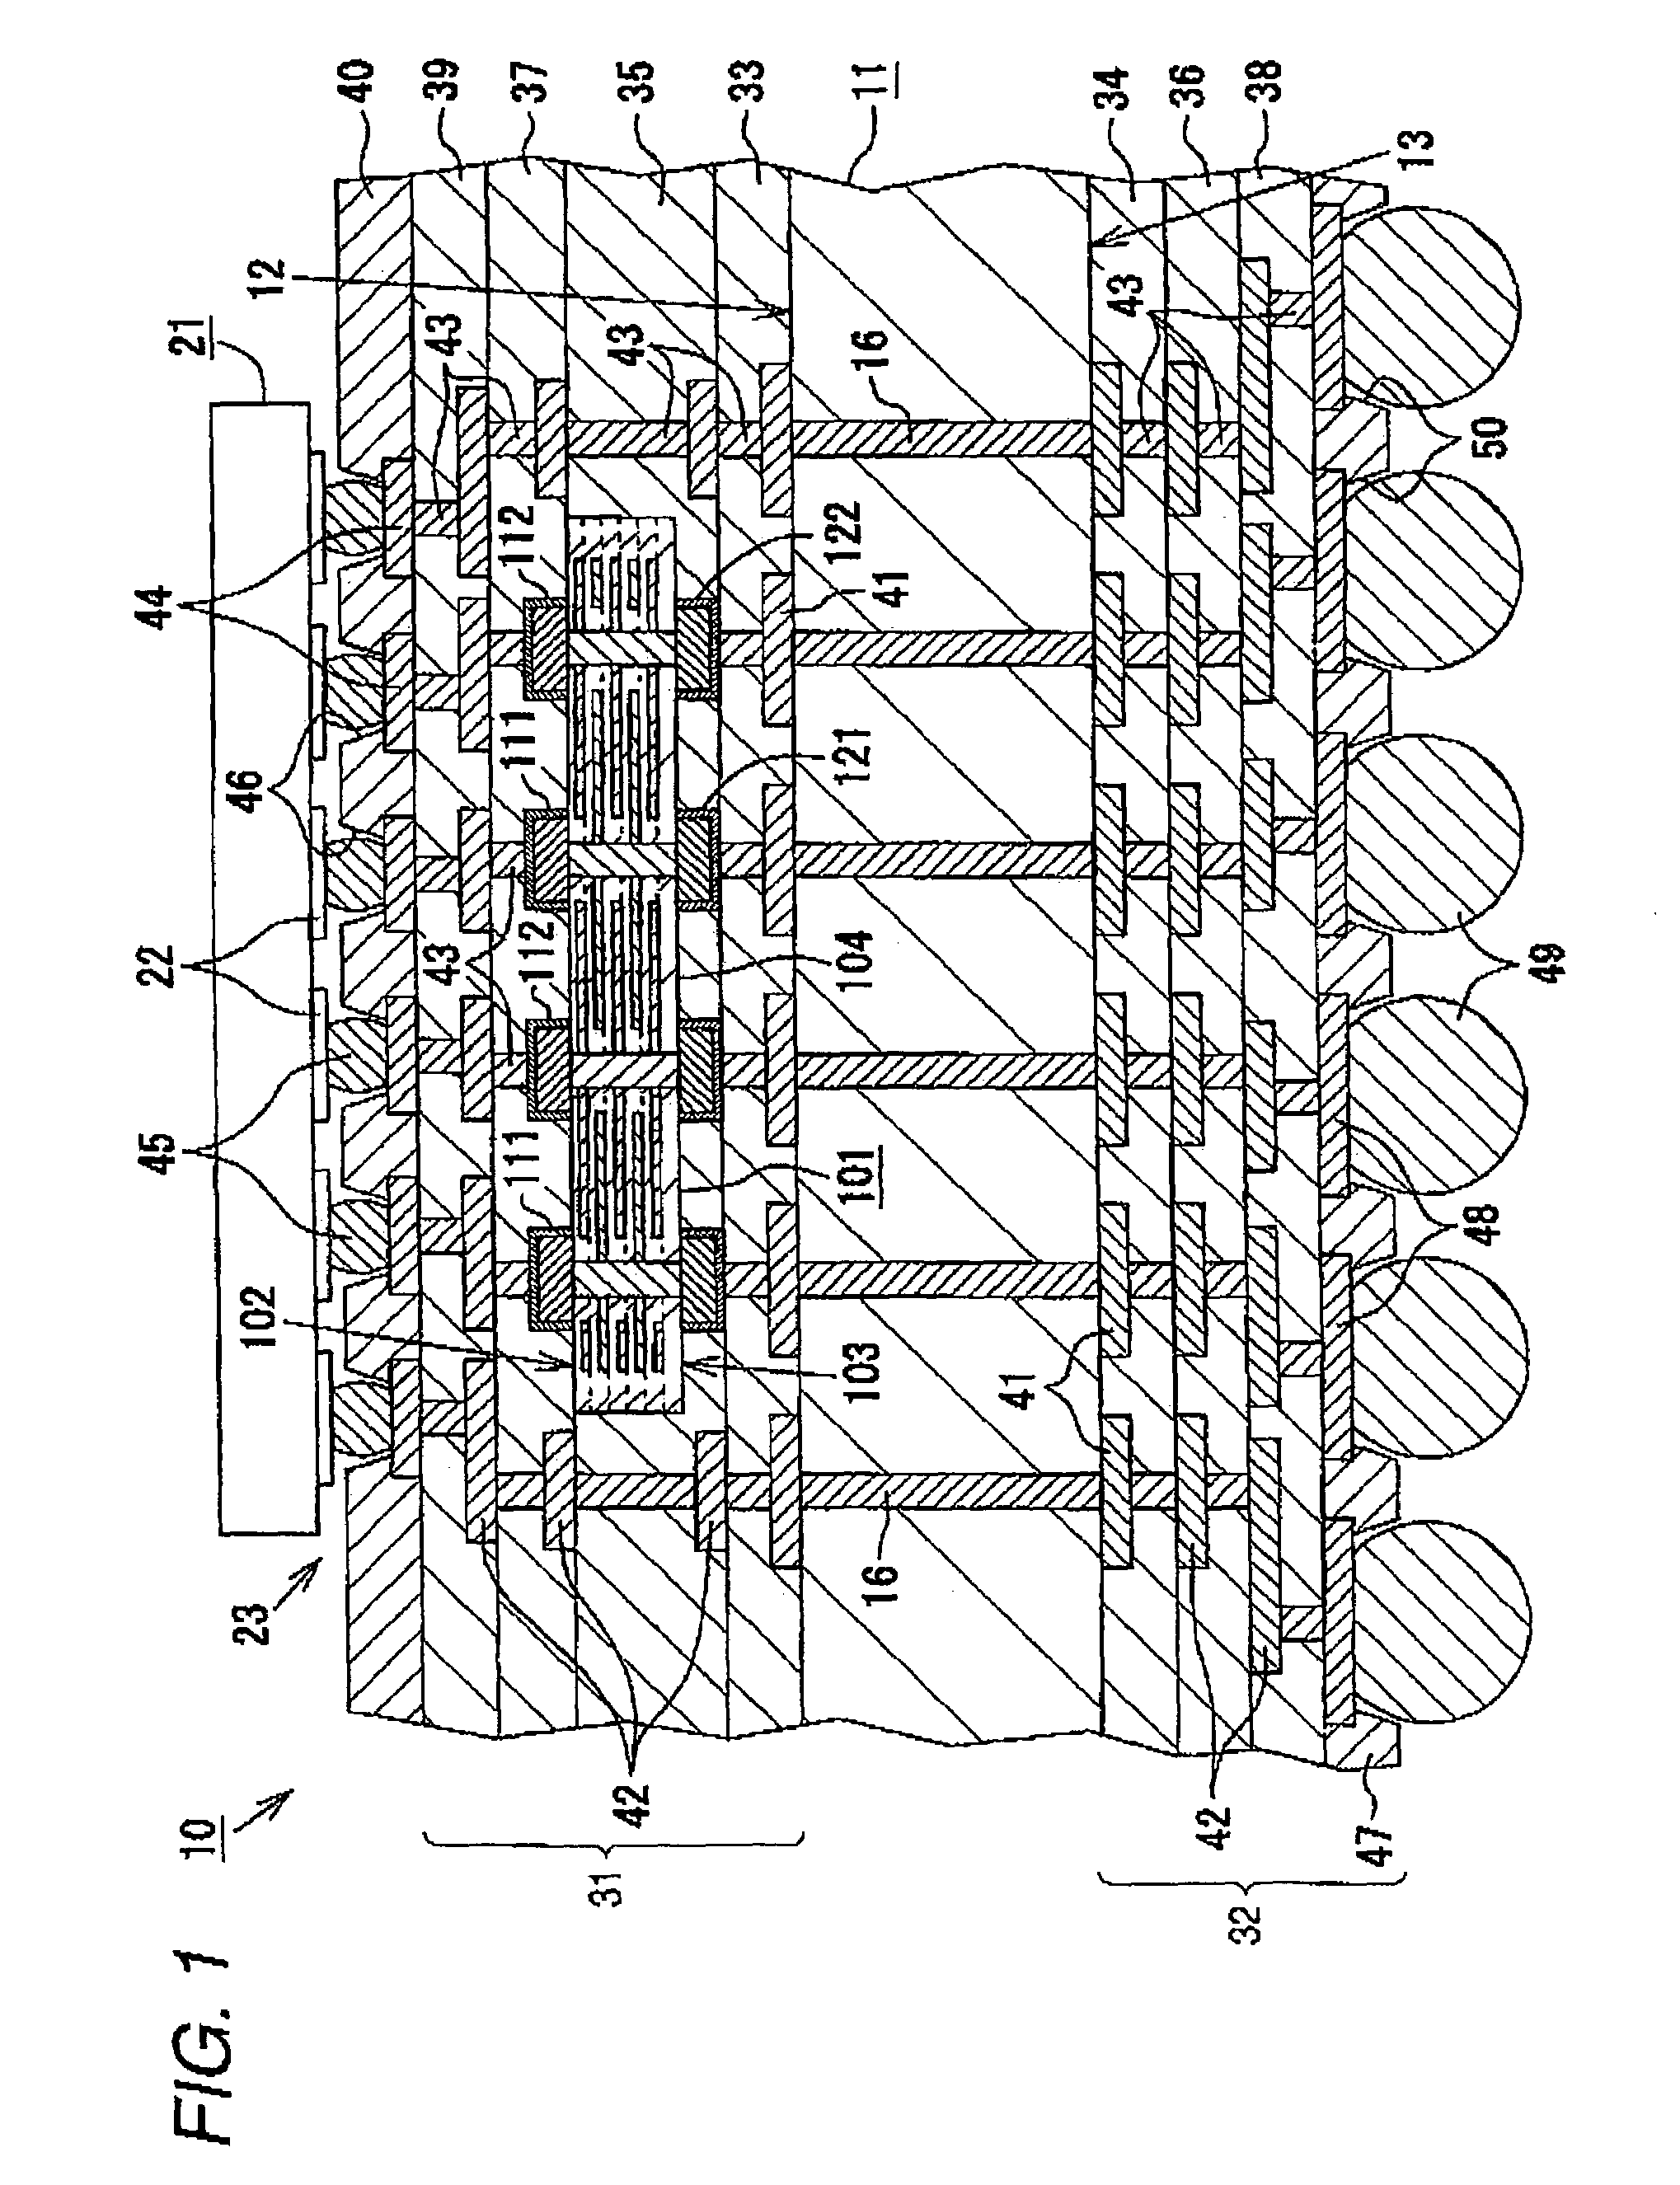 Via array capacitor, wiring board incorporating a via array capacitor, and method of manufacturing the same